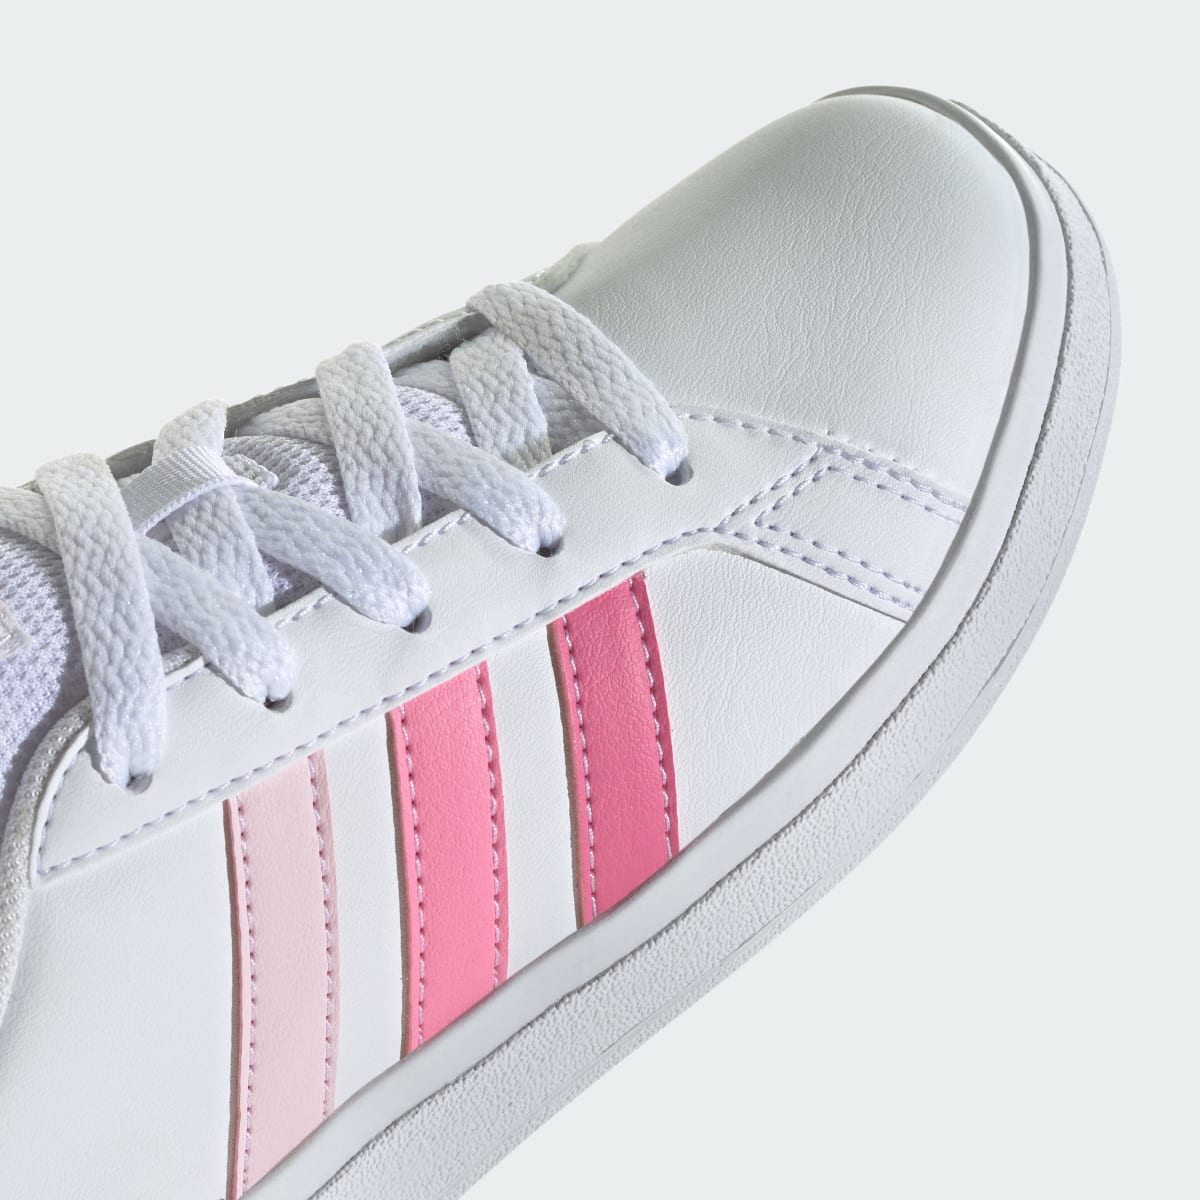 Adidas Grand Court Lifestyle Tennis Lace-Up Shoes. 10